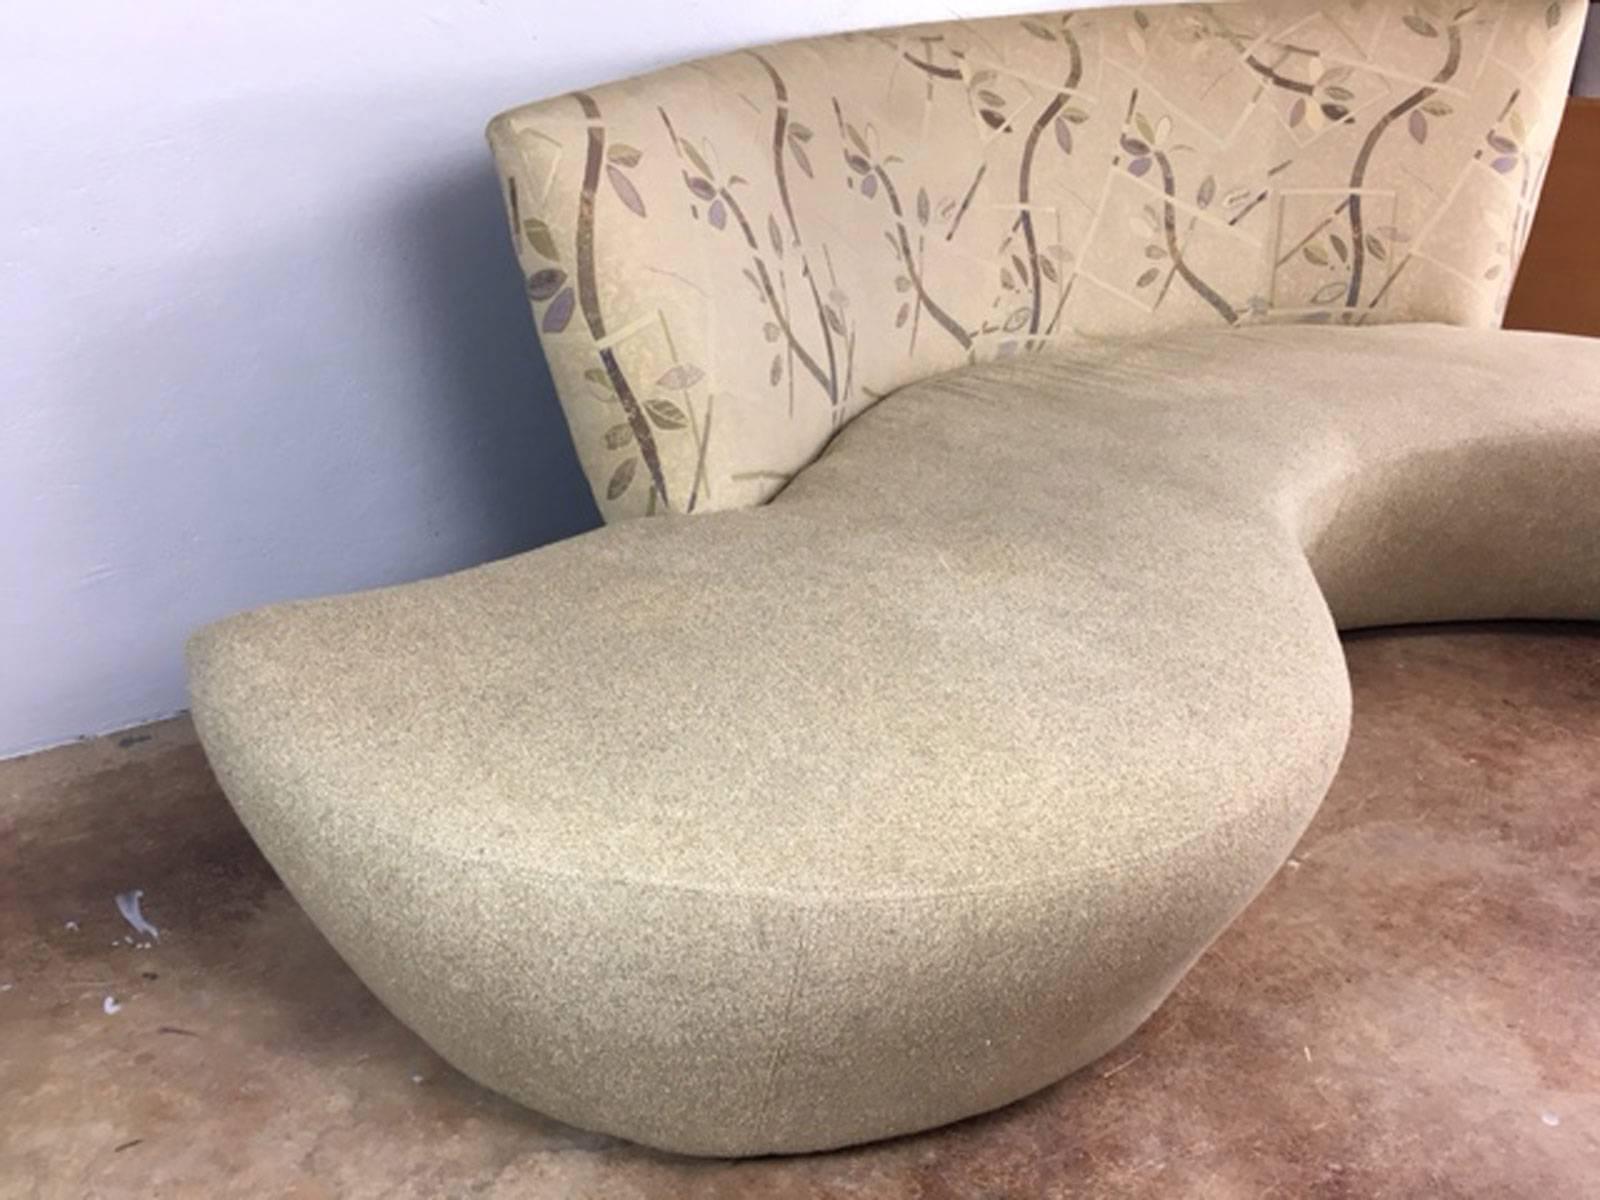 Sculptural sofa in two-tone fabric combination of a boucle' beige and slight floral pattern, designed by Vladimir Kagan manufactured by Preview. Inspired by Frank Gehry's Guggenheim Museum in Bilbao, Spain.